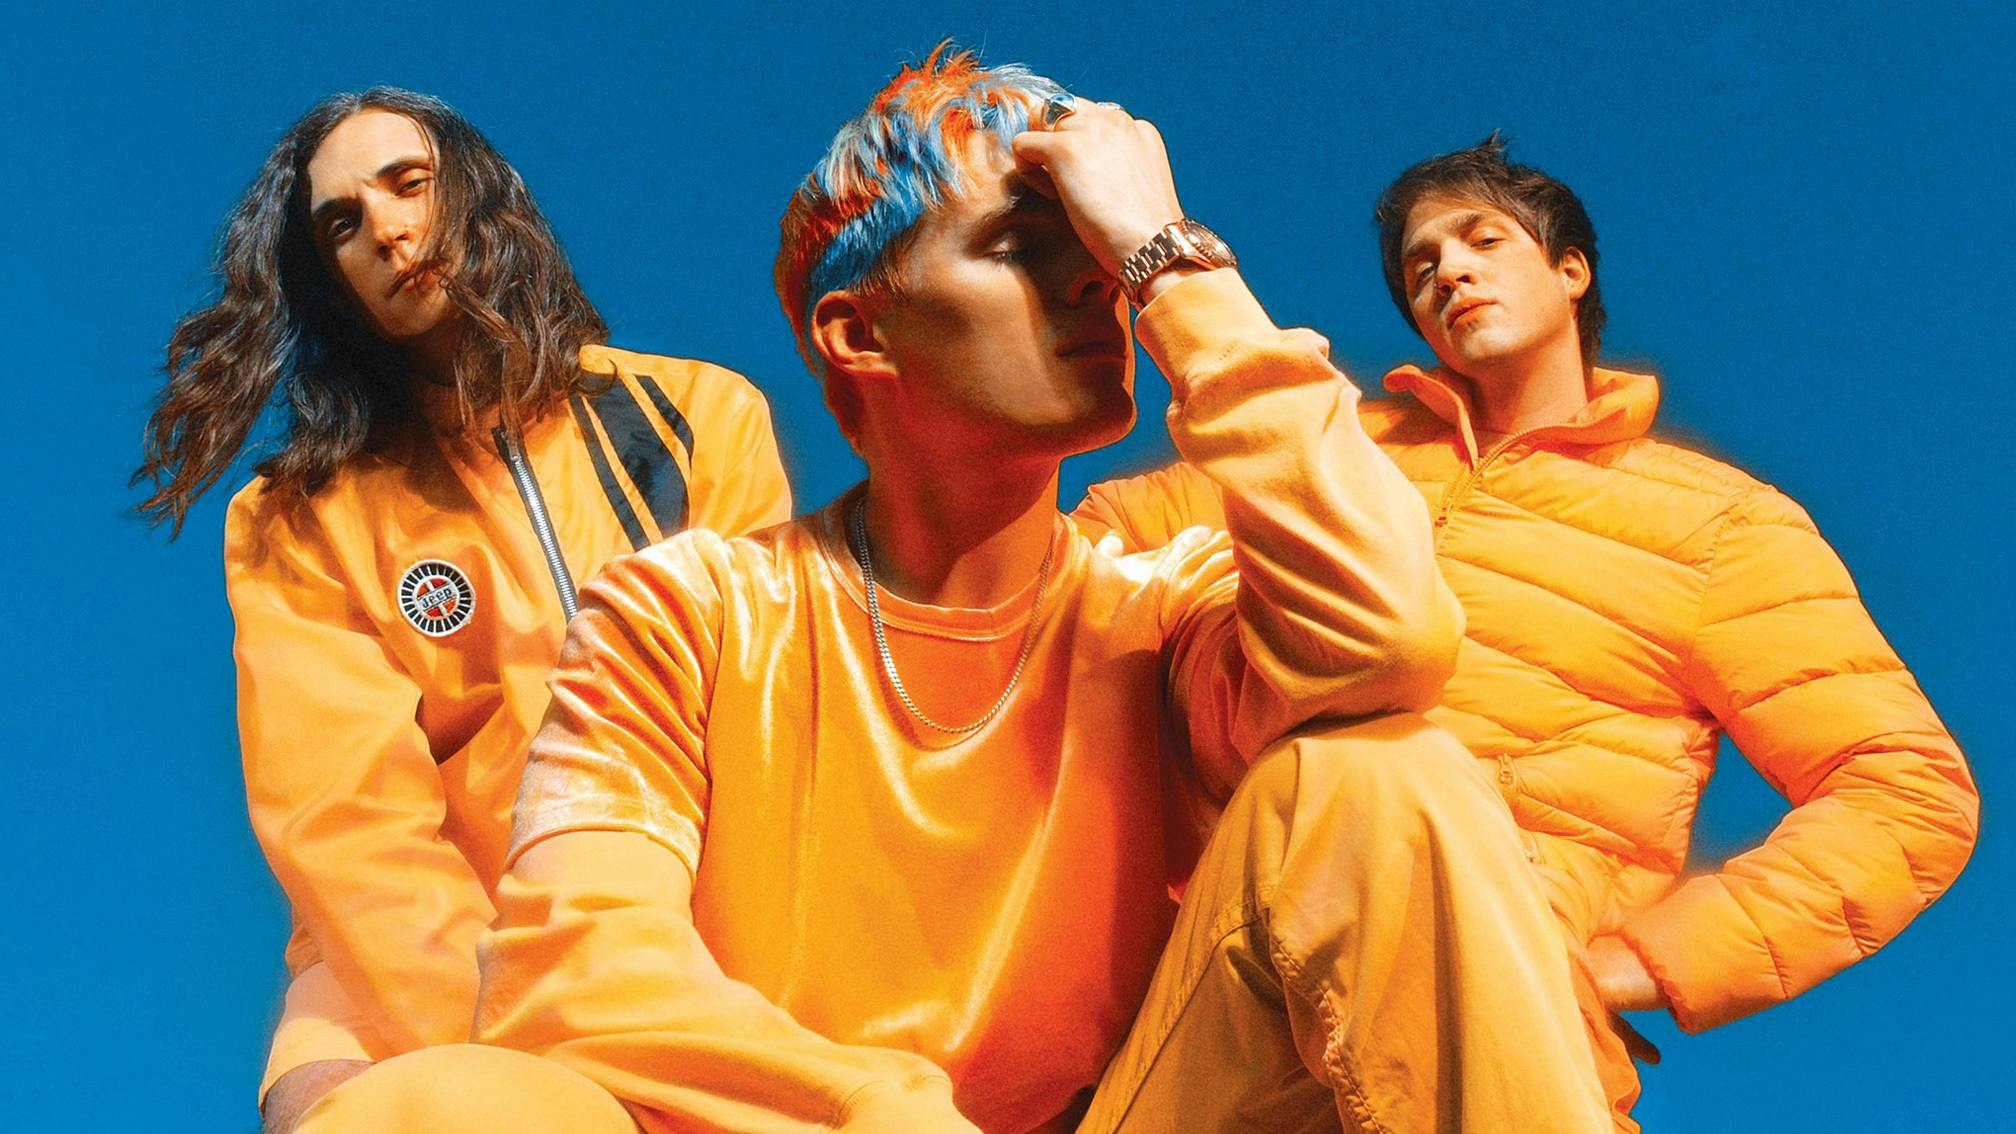 Listen to Waterparks' infectious new song, Numb